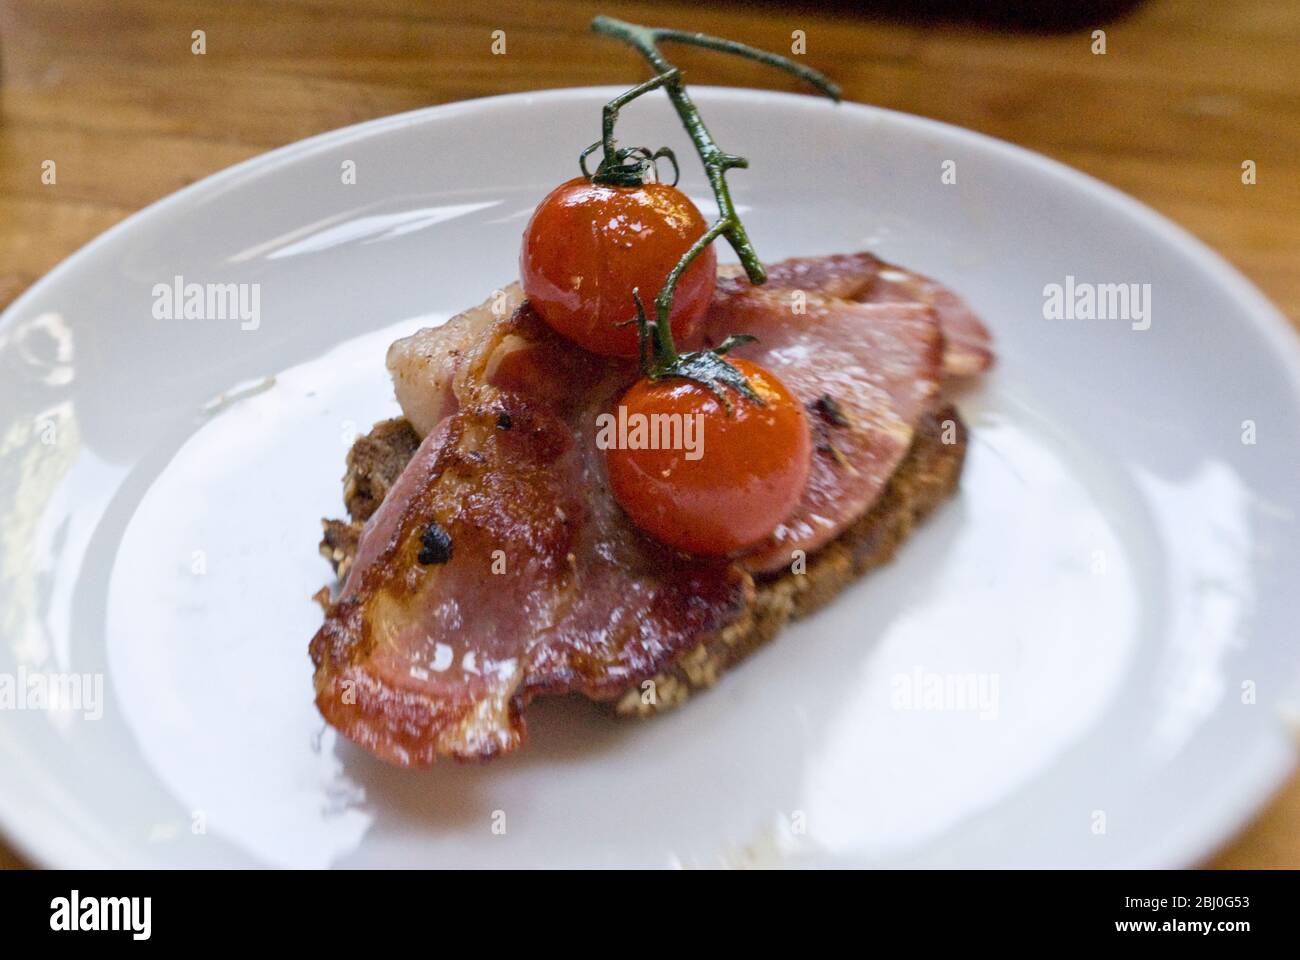 Breakfast dish of coarse wholemeal rye bread with organic bacon and griddled chery tomatoes on the vine - Stock Photo